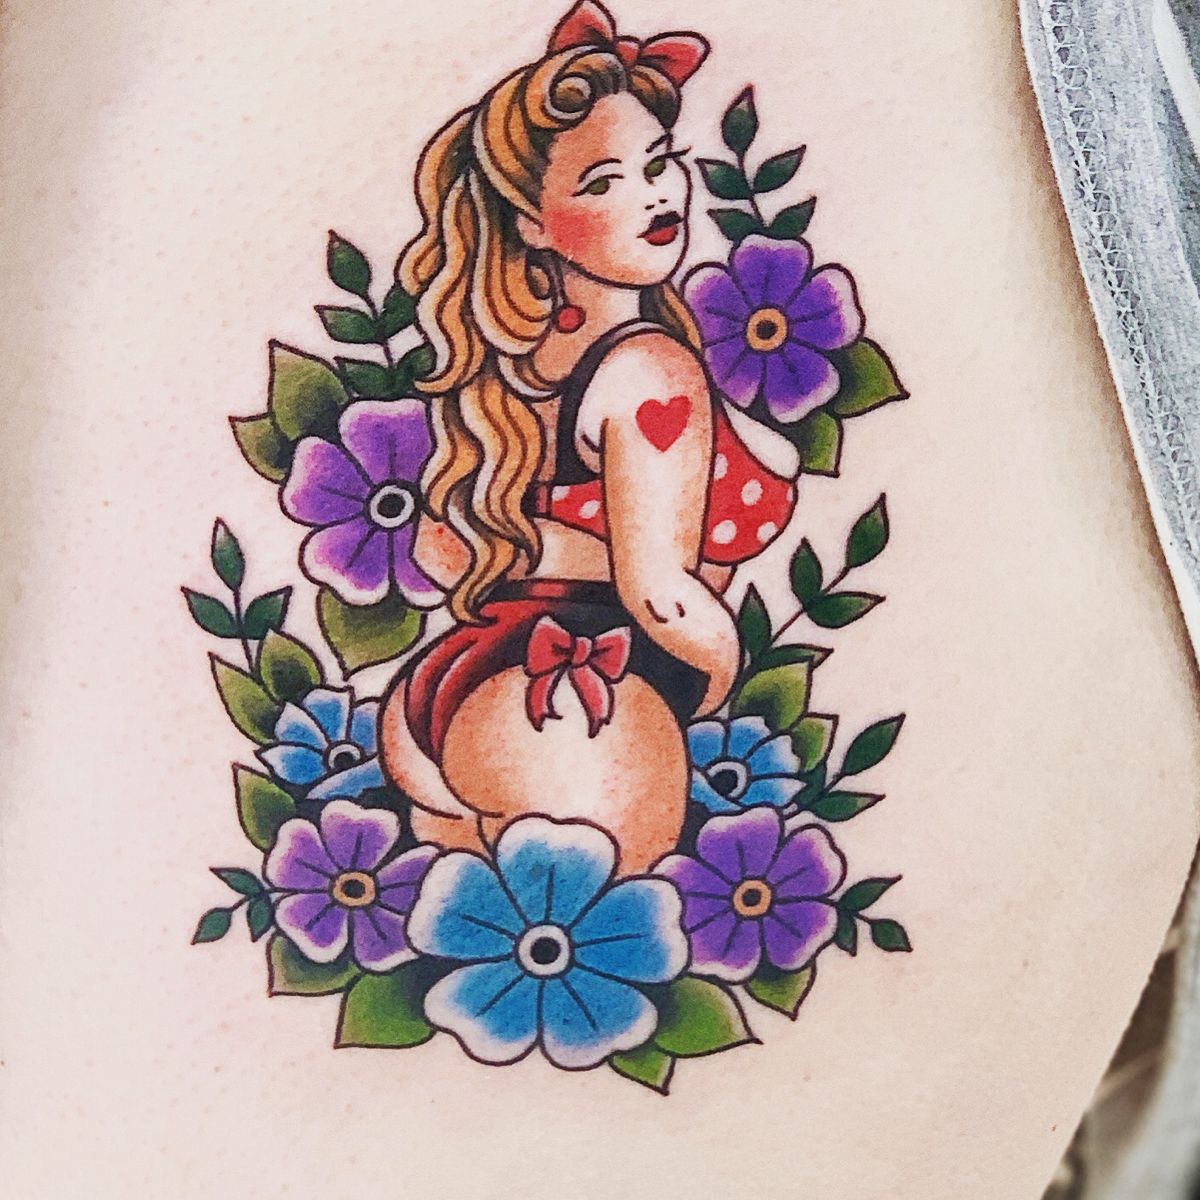 diane eilers recommends chubby pin up tattoo pic